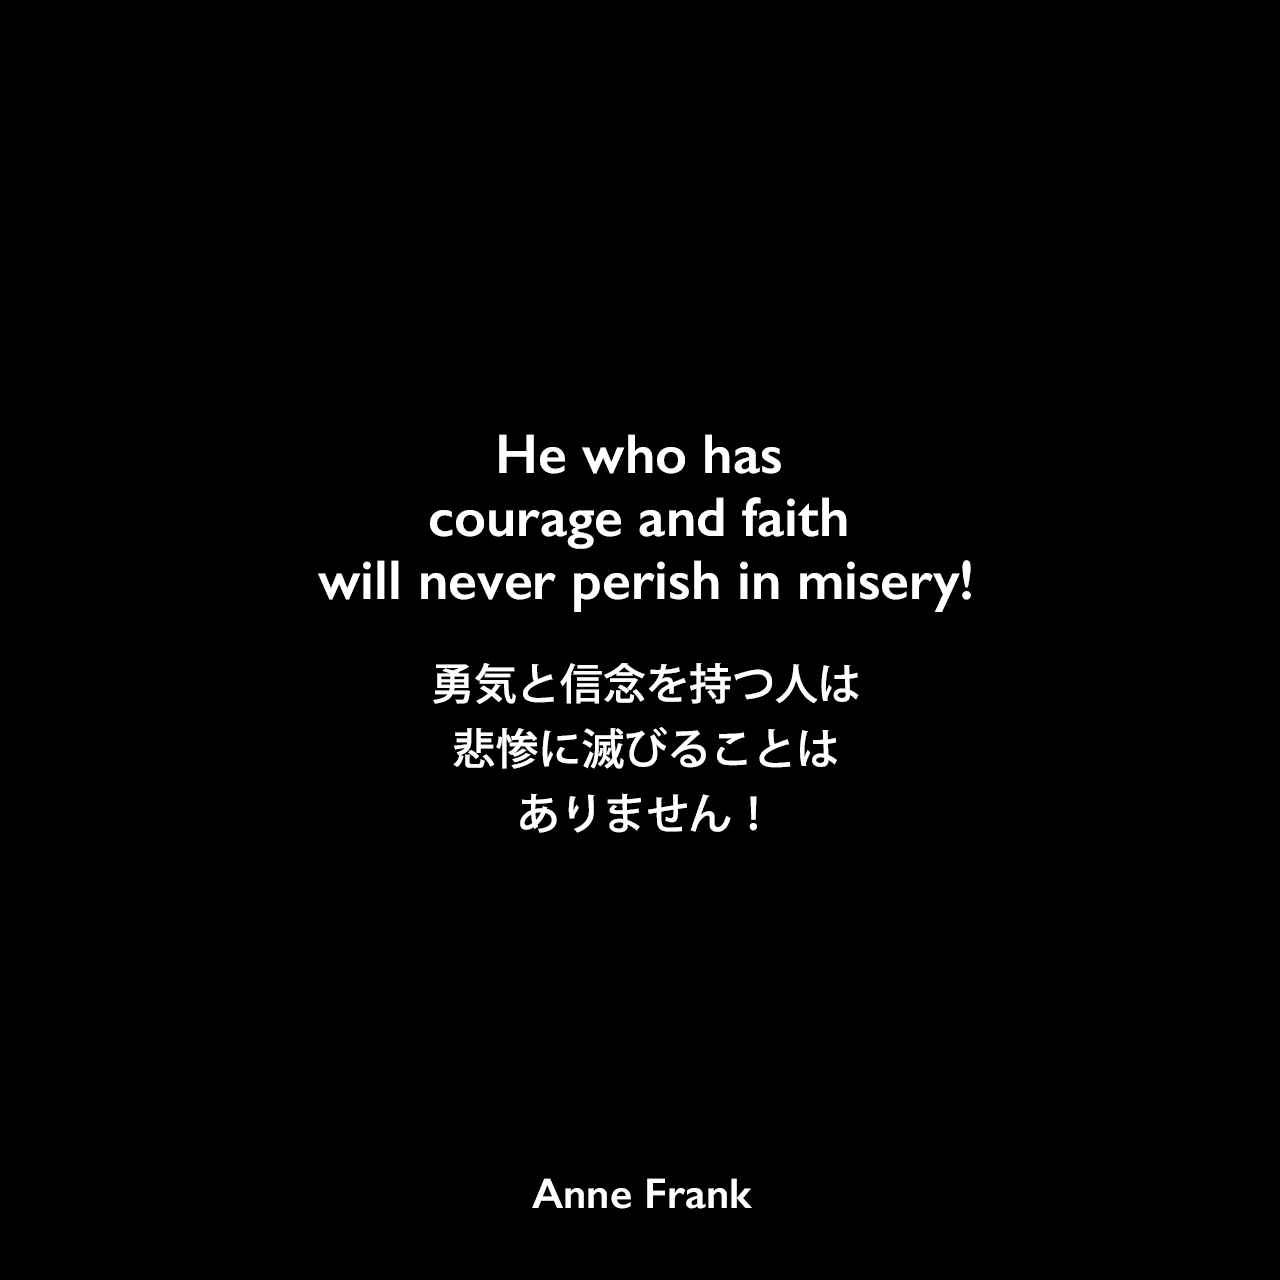 He who has courage and faith will never perish in misery!勇気と信念を持つ人は、悲惨に滅びることはありません！- 「アンネの日記」よりAnne Frank